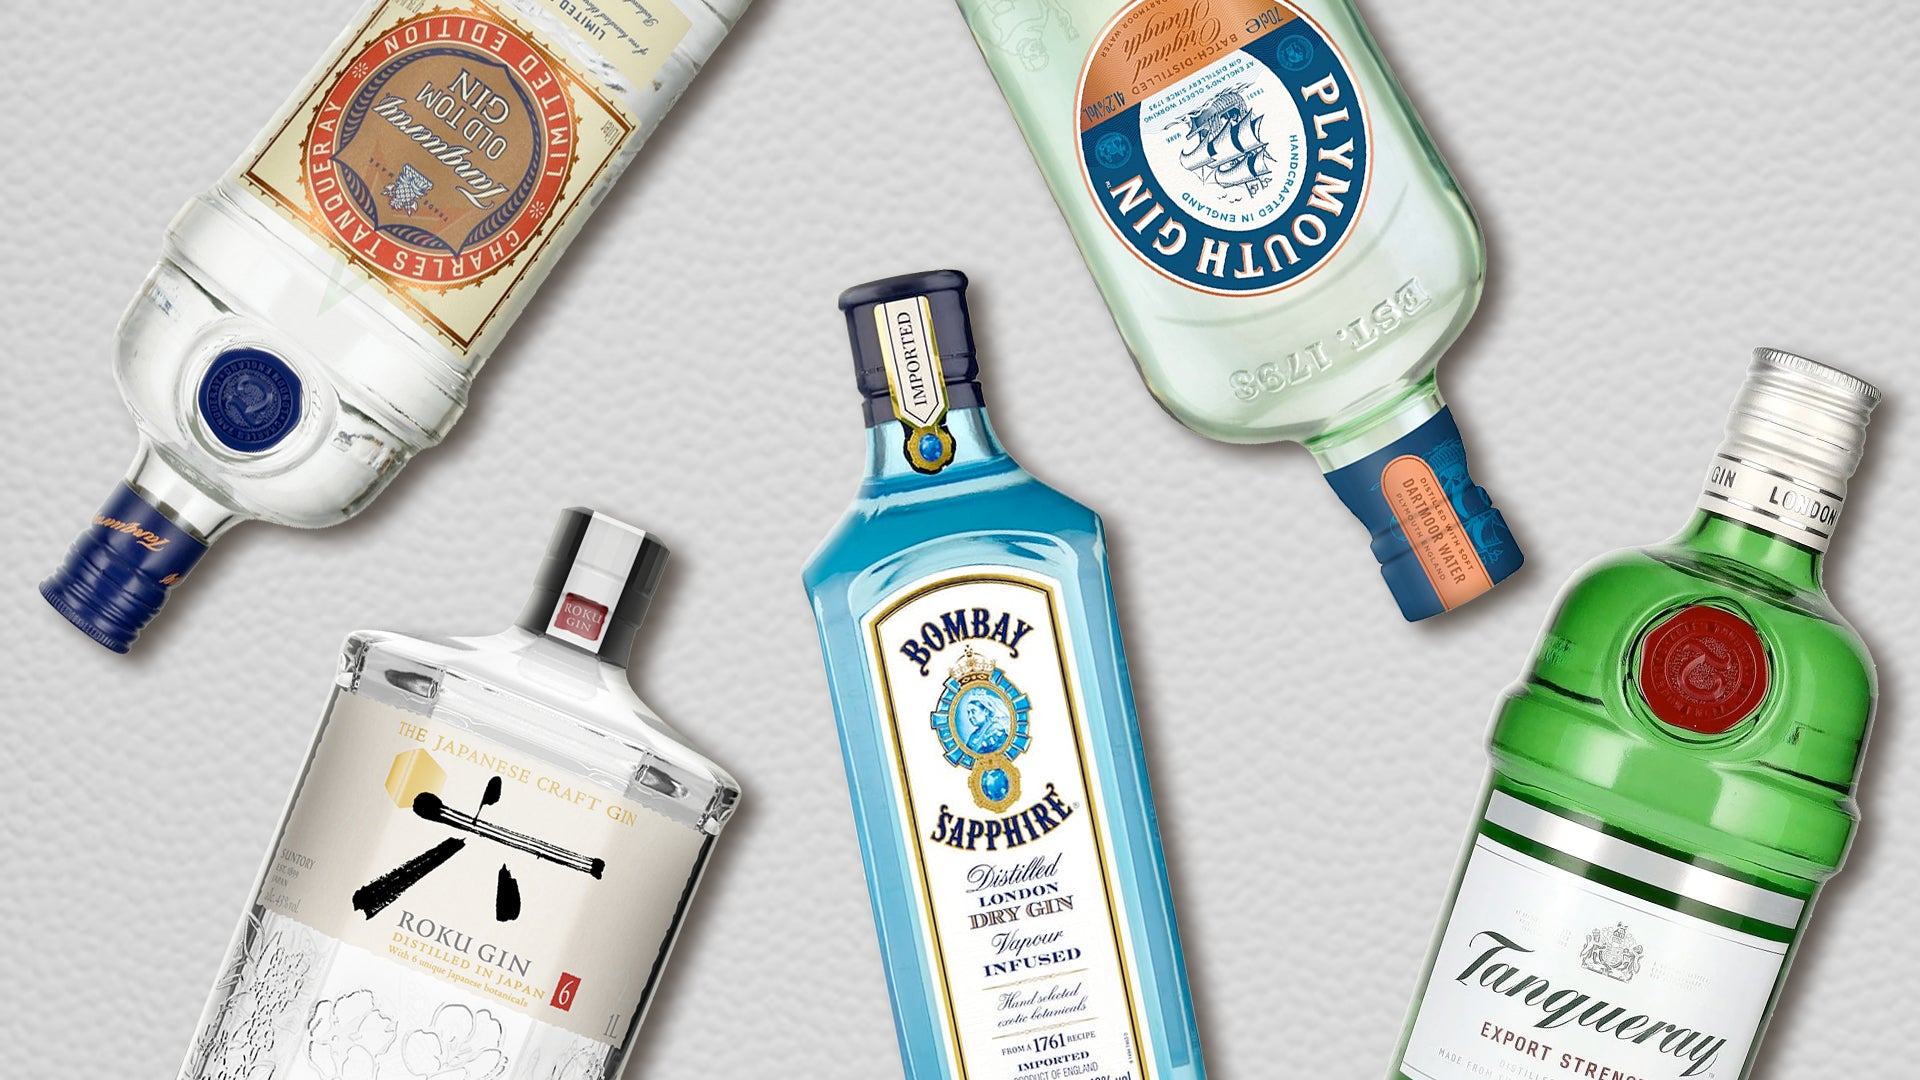 Types of Gin: A Guide Popular to the Most Varieties